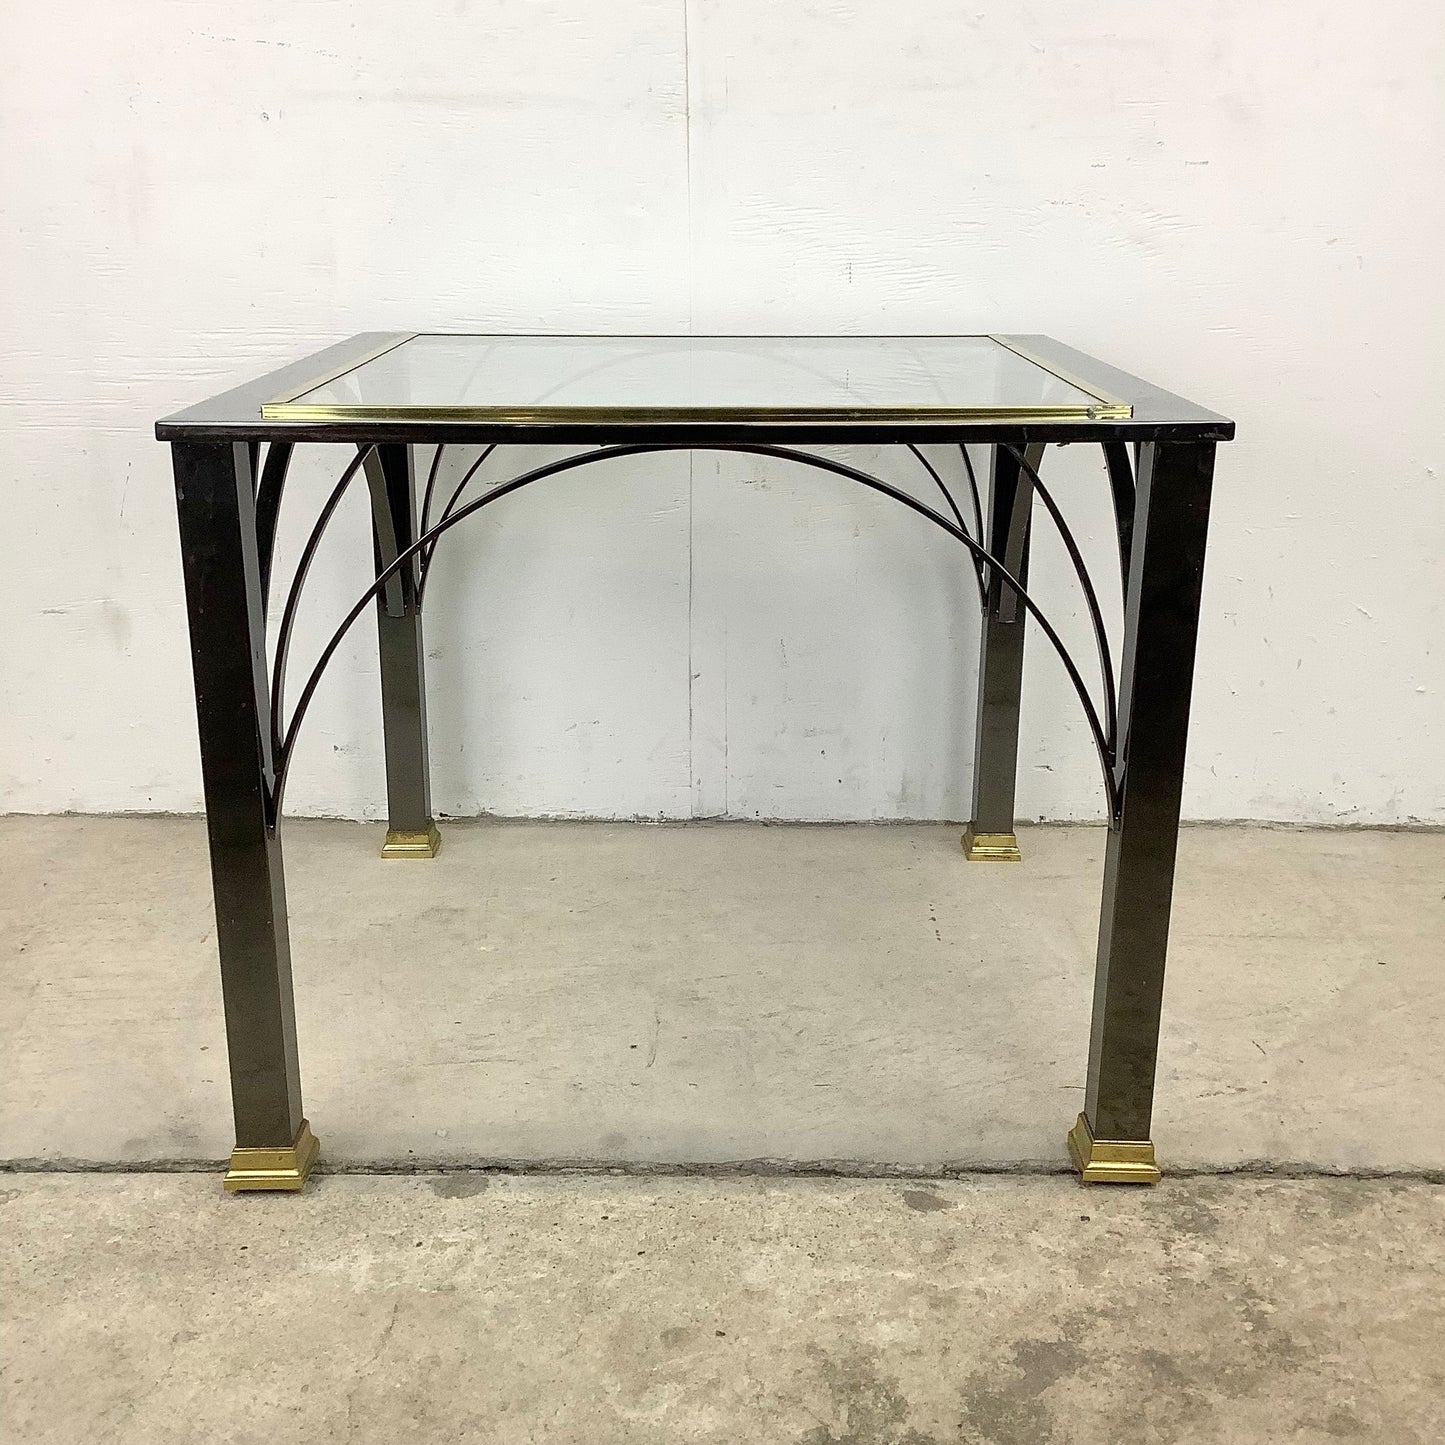 Modern Dark Chrome and Glass Top End Table from Design Institute of America